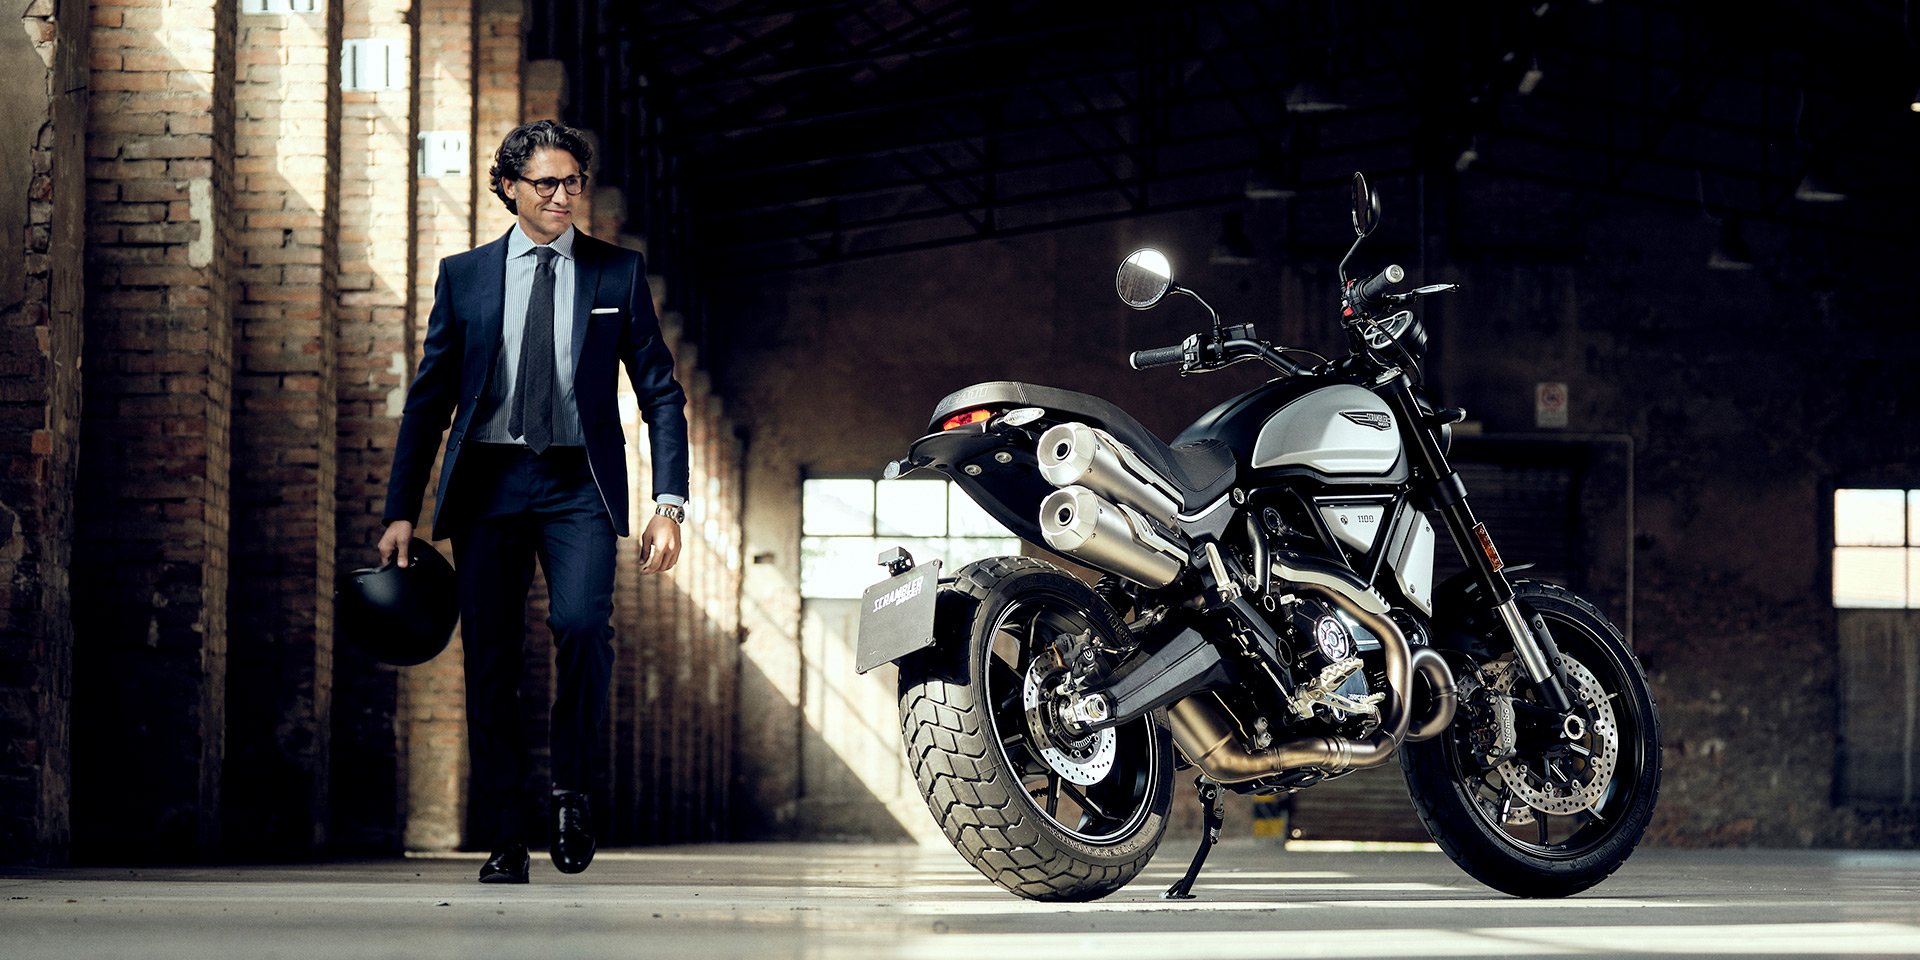 All The New Bikes Of The Ducati Scrambler 21 Range Available In Dealerships